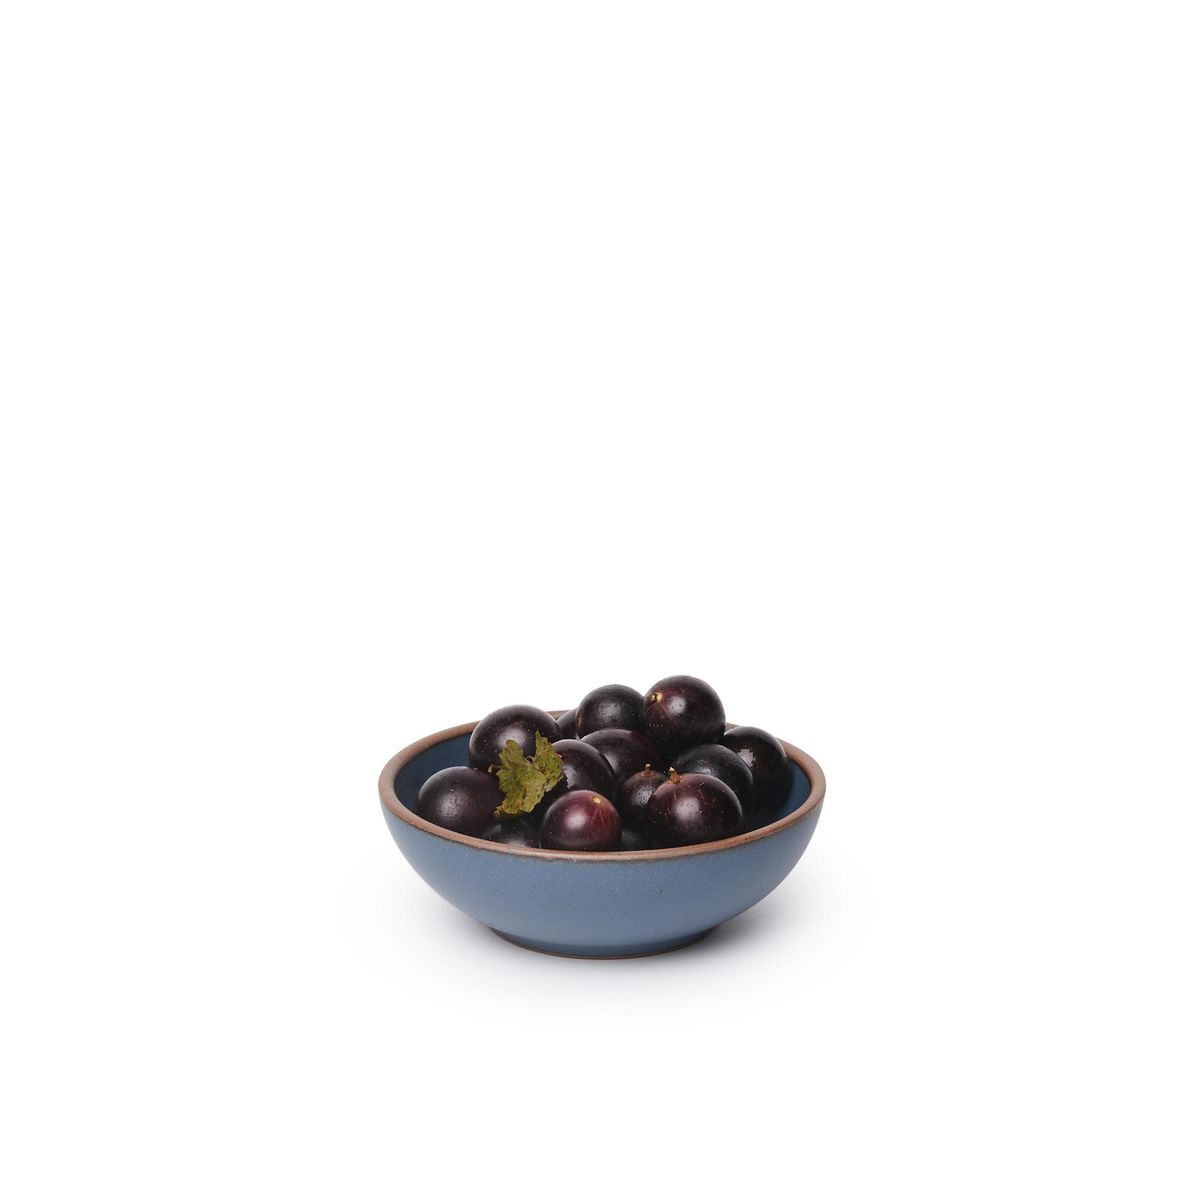 Breakfast Bowl in Blue Ridge filled with cherries